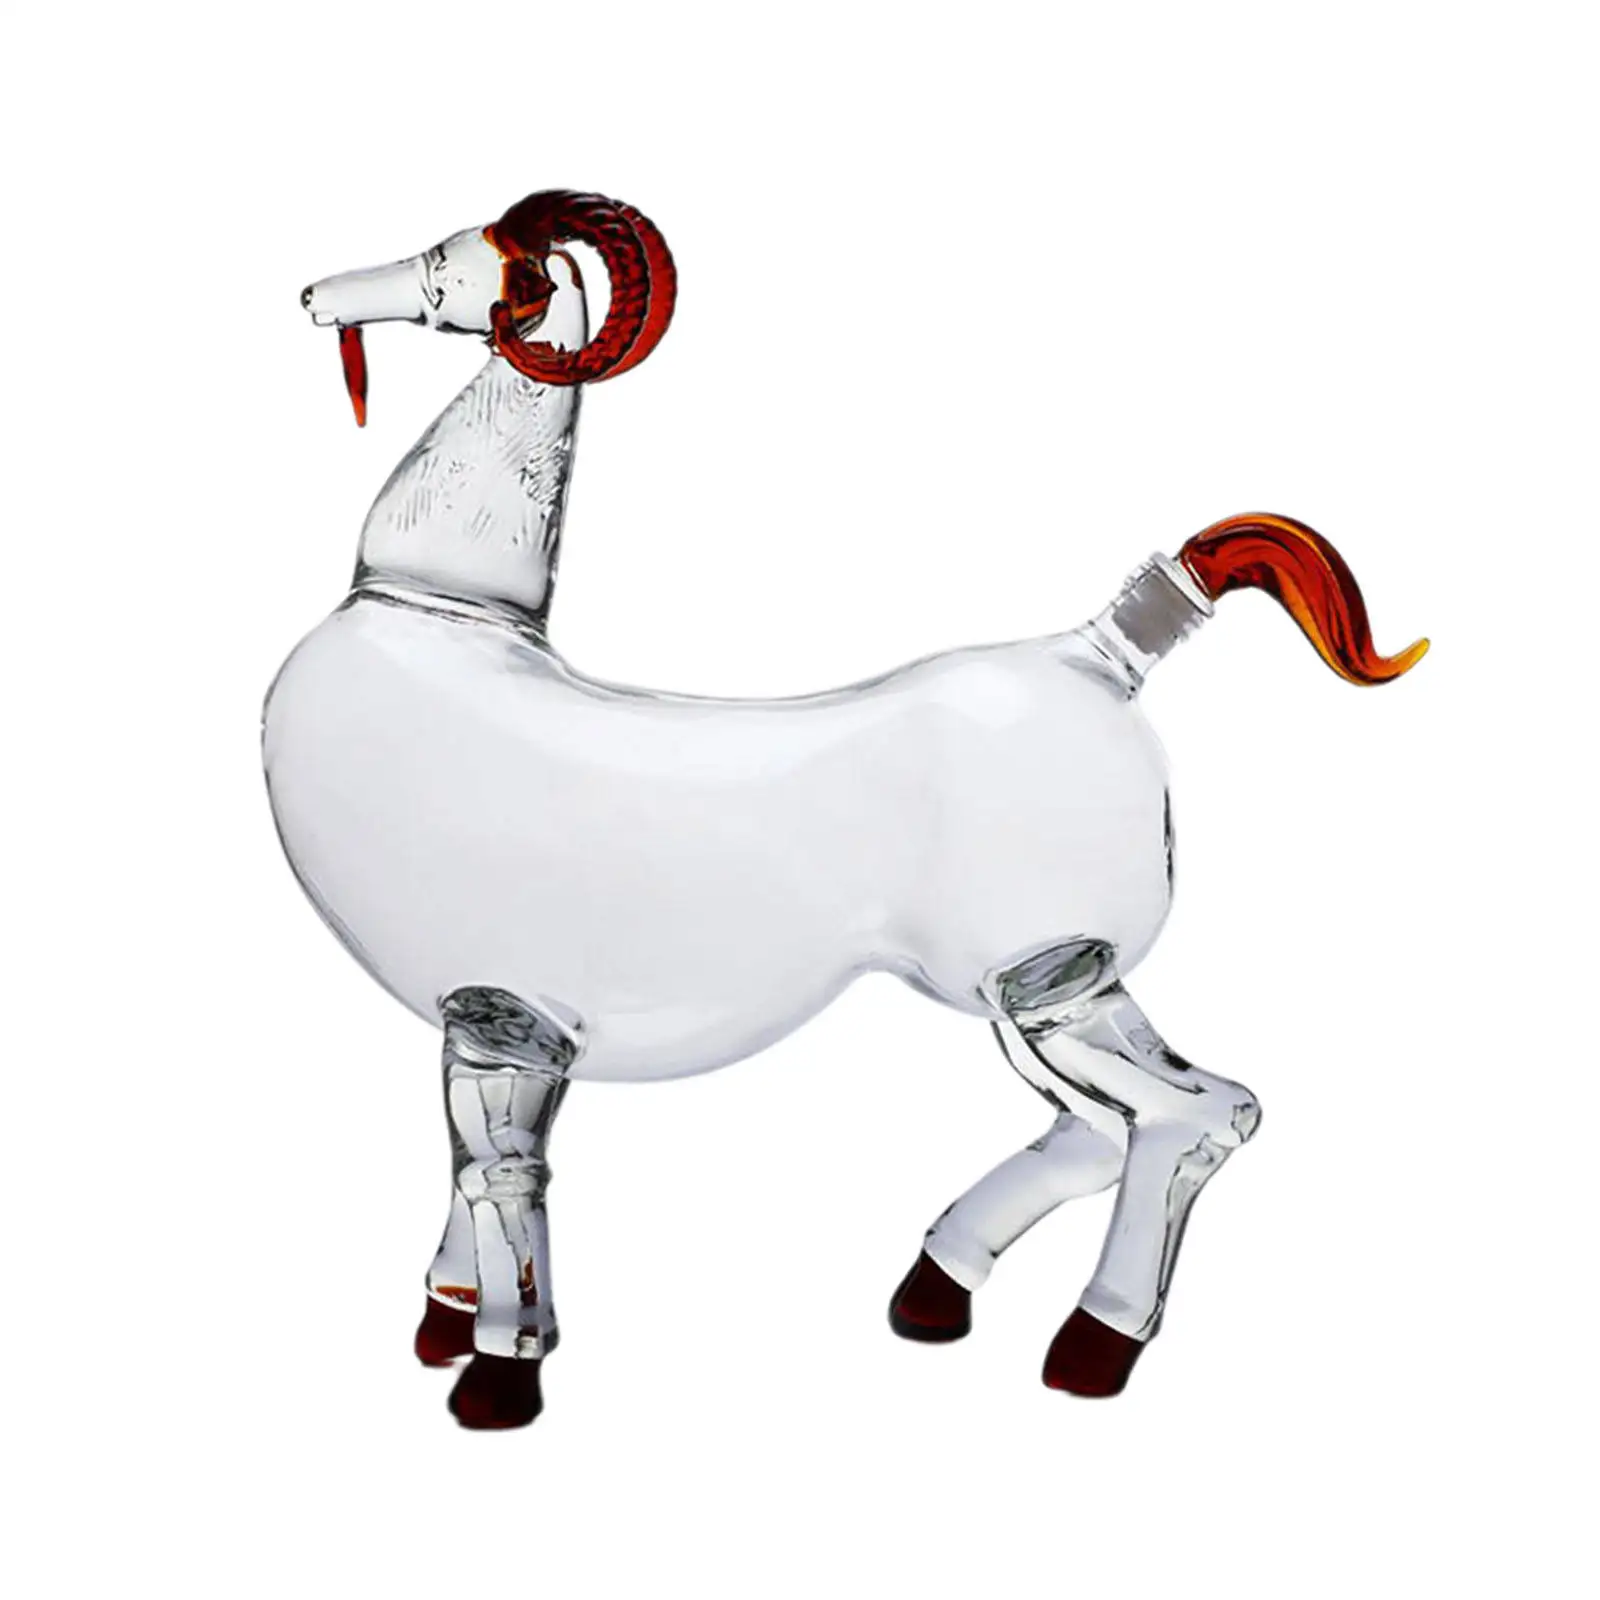 Goat Shaped Whisky Decanter Decoration Liquor Decanters for Christmas Present Entertaining Drinkware Holiday Gifts Home Bar Mens